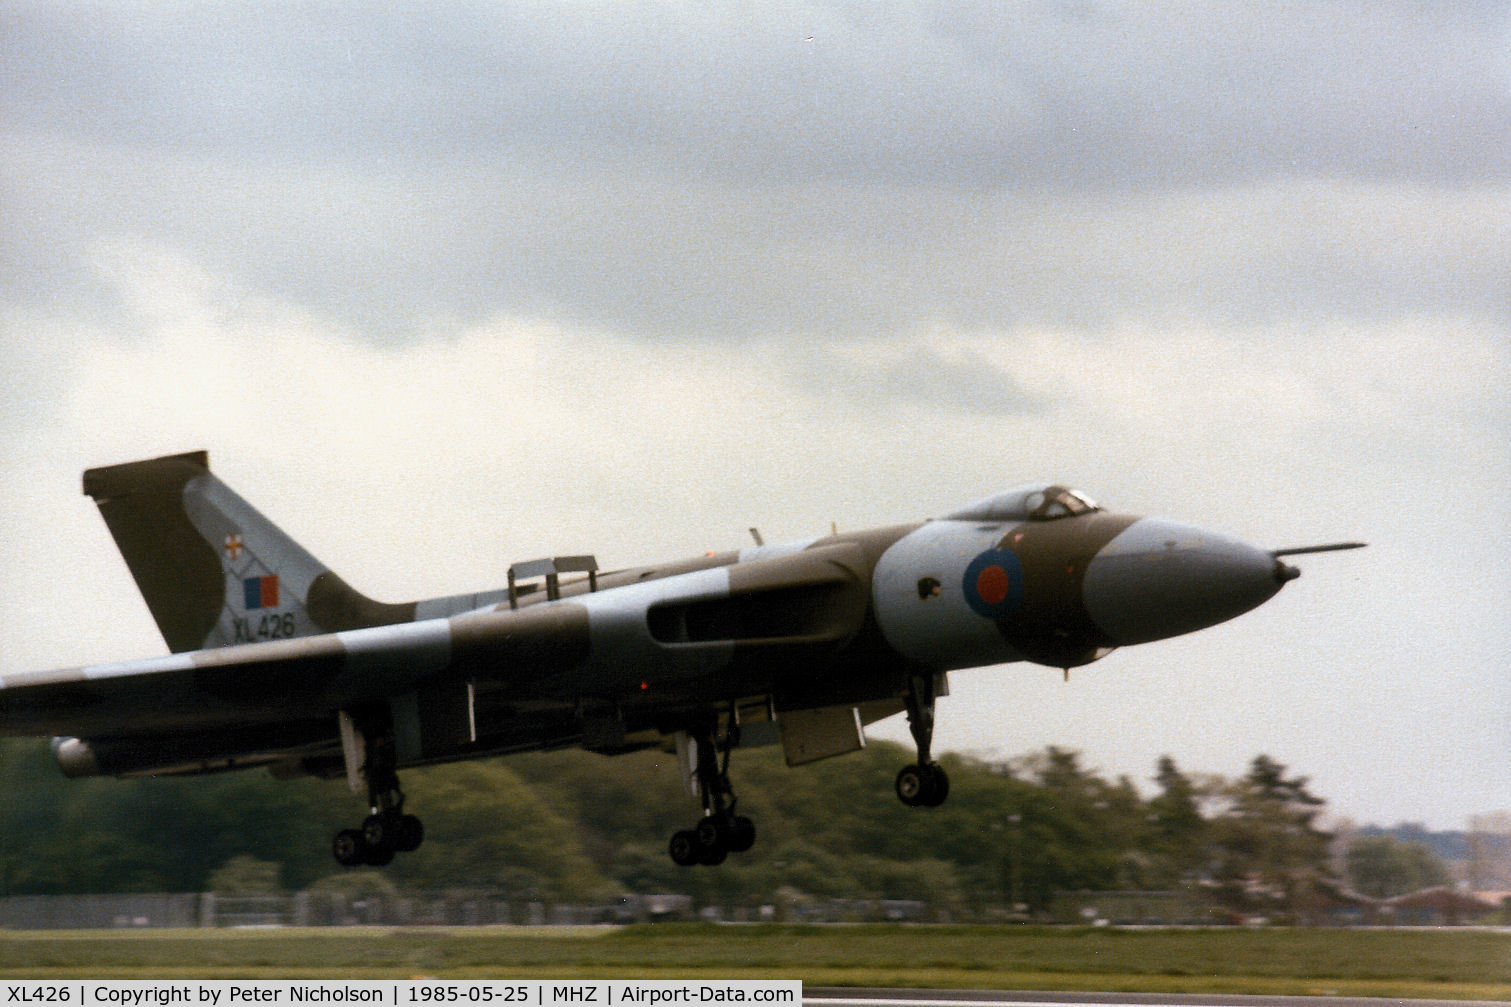 XL426, 1962 Avro Vulcan B.2 C/N Set 44, Vulcan B.2 of the RAF's Vulcan Display Flight arriving at the 1985 RAF Mildenhall Air Fete.